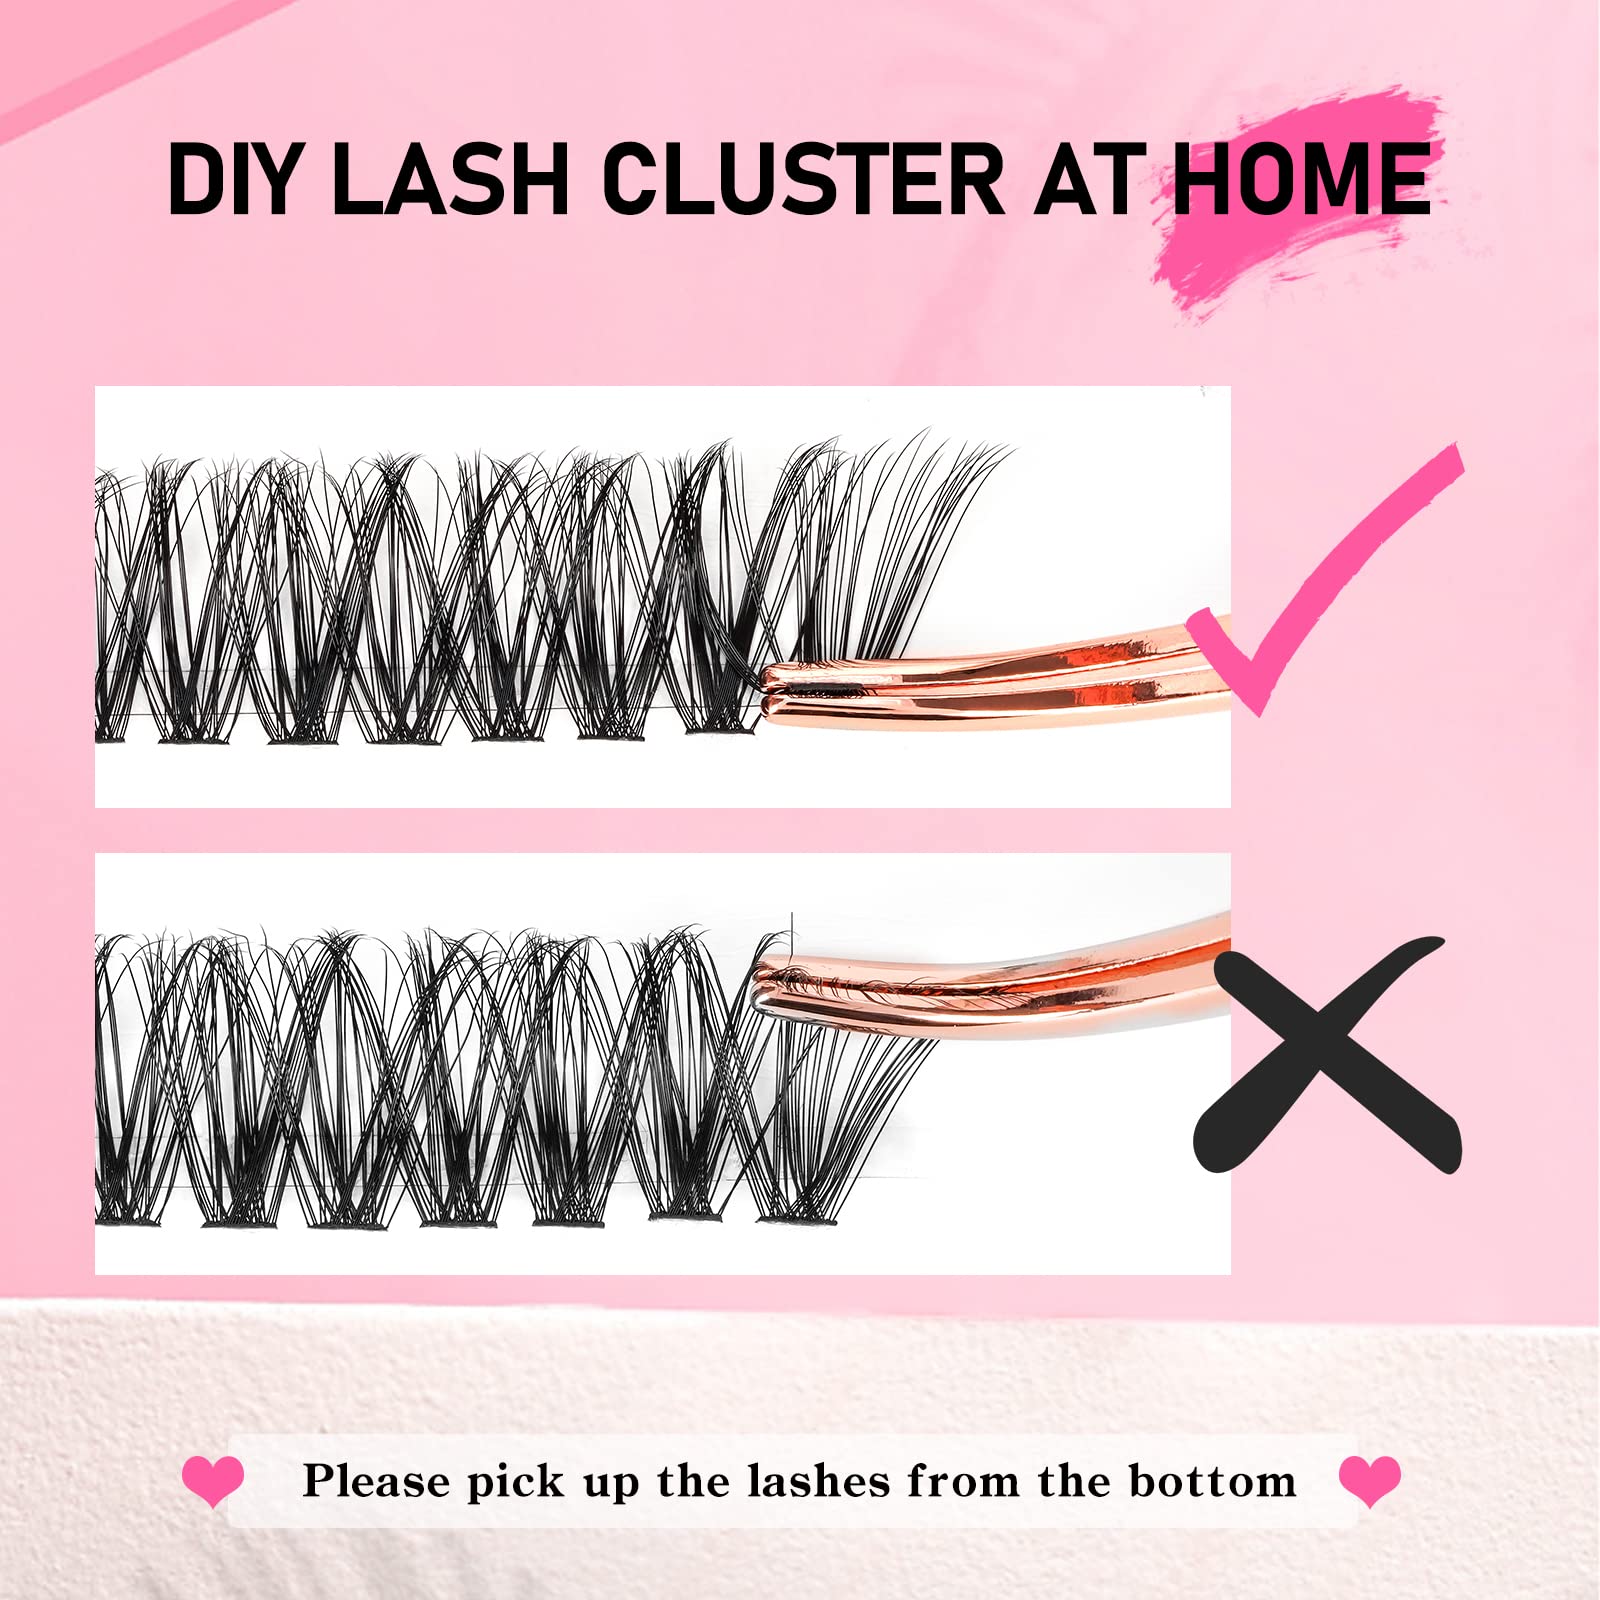 Individual Lashes 320 PCS, Crislashes Lash Clusters 30D+40D Mixed D Curl 9-16mm 16Rows Reusable Cluster Lashes Individual Soft and Lightweight DIY Lash Extension Self Application (30+40-D-Mix9-16mm)